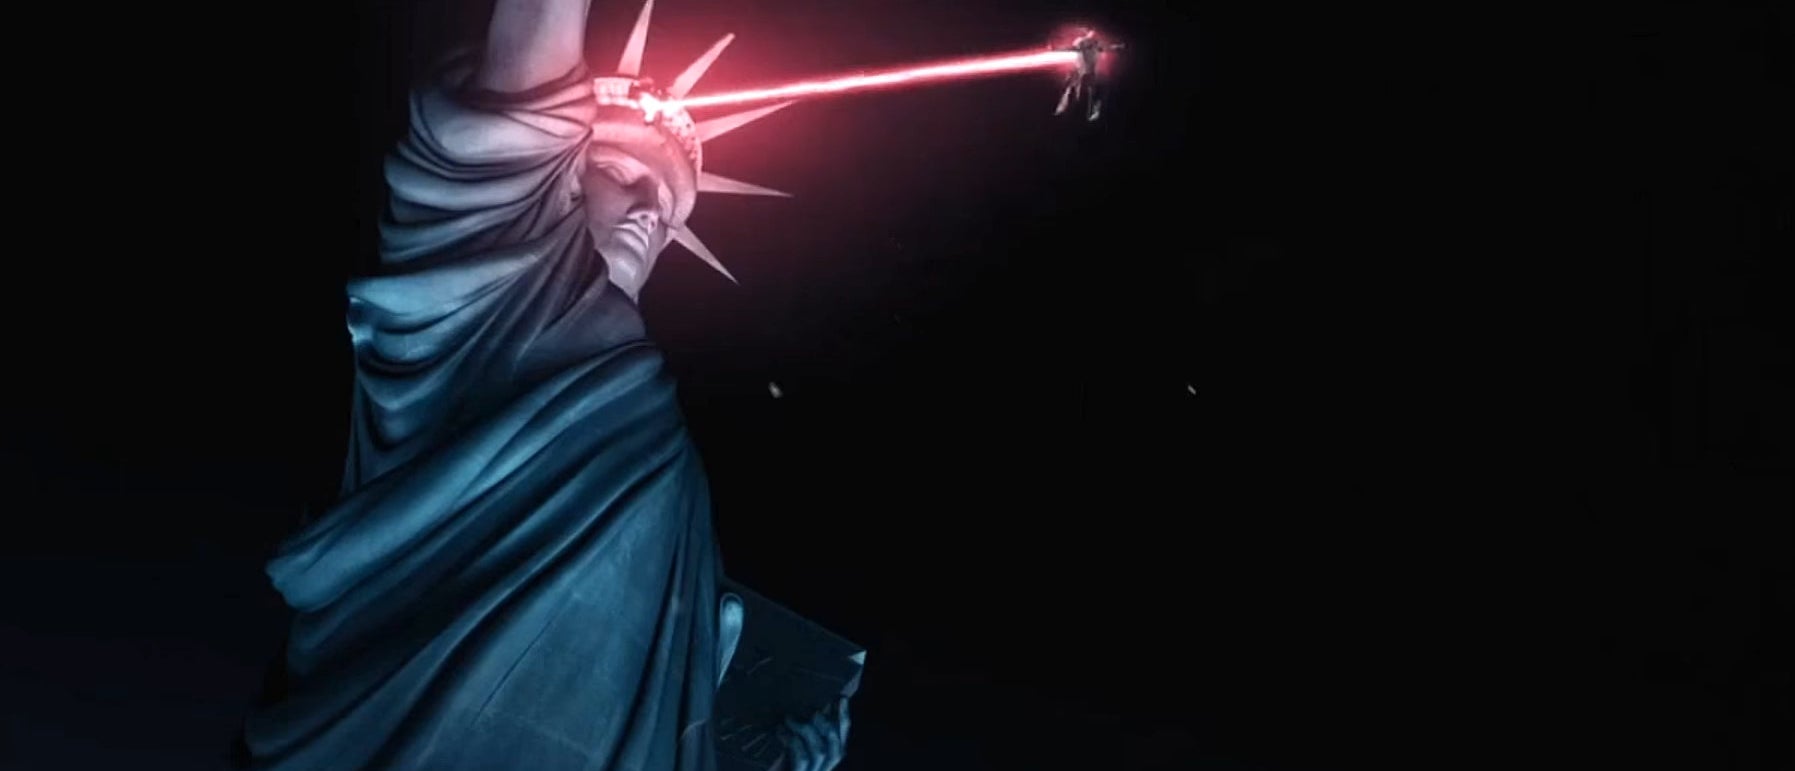 Cyclops blasting a bad guy out of the Statue of liberty